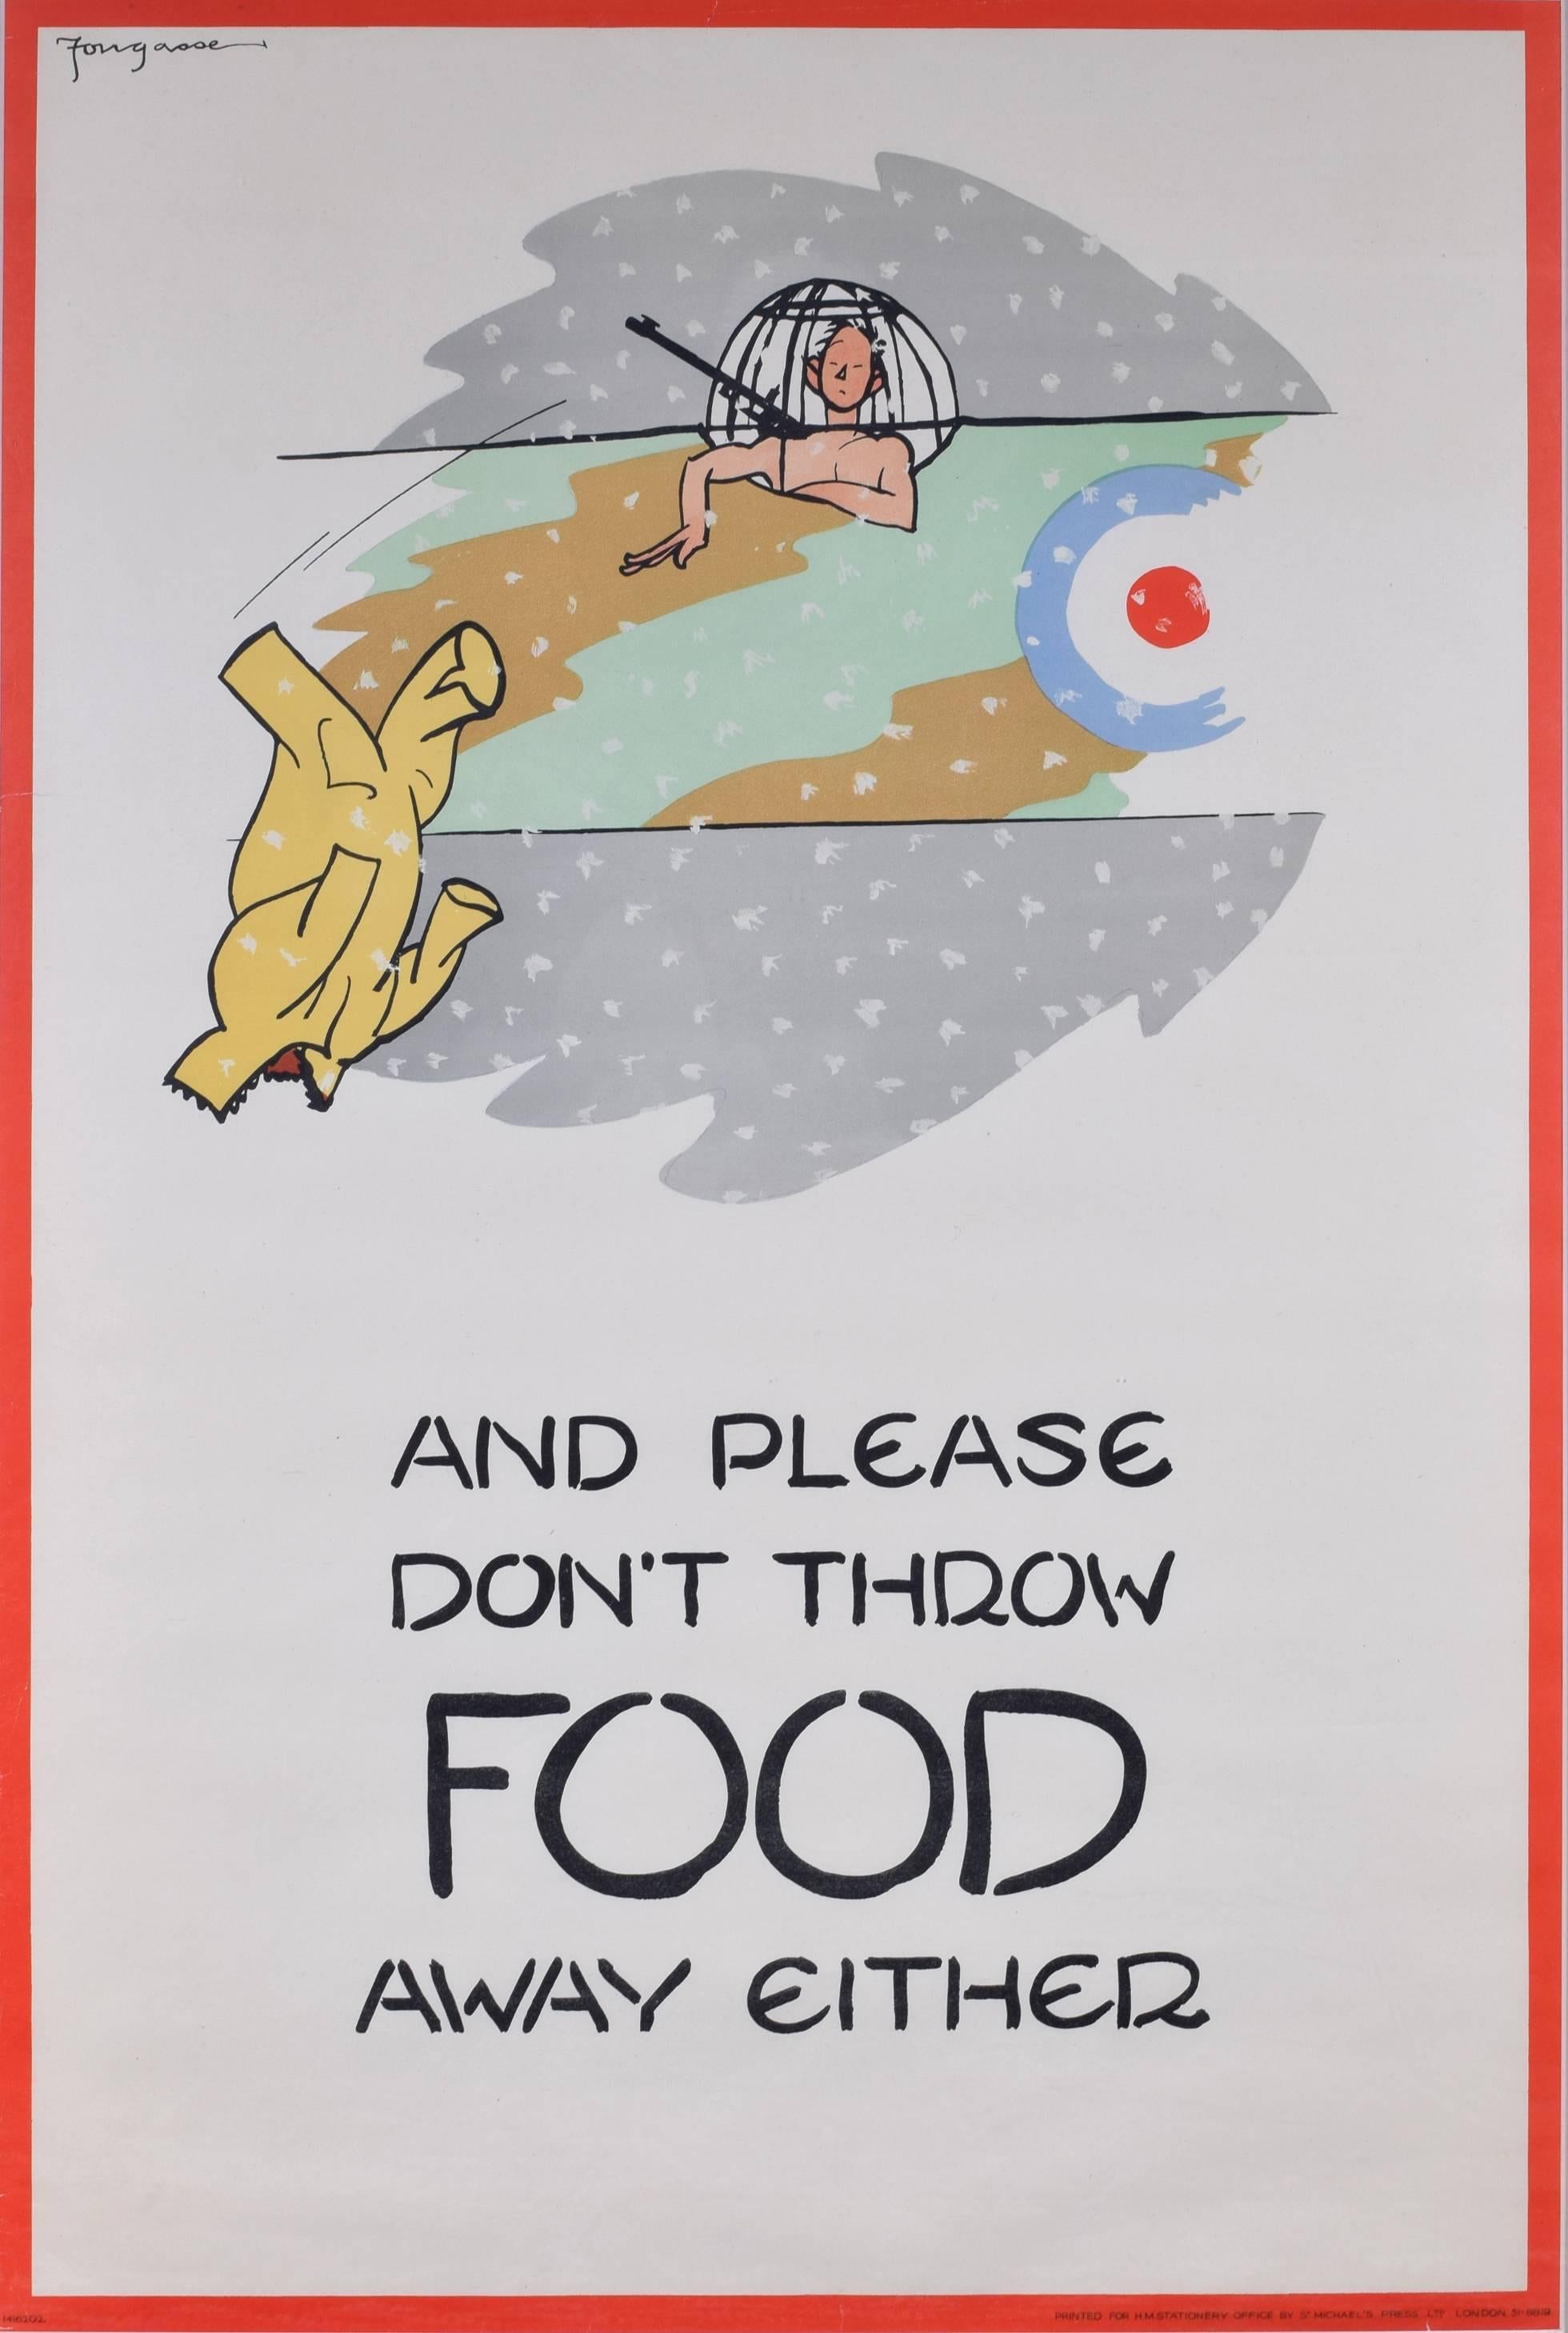 Fougasse (Cyril Kenneth Bird) Print - Fougasse 1941 large poster: And please don't throw food away either (RAF)